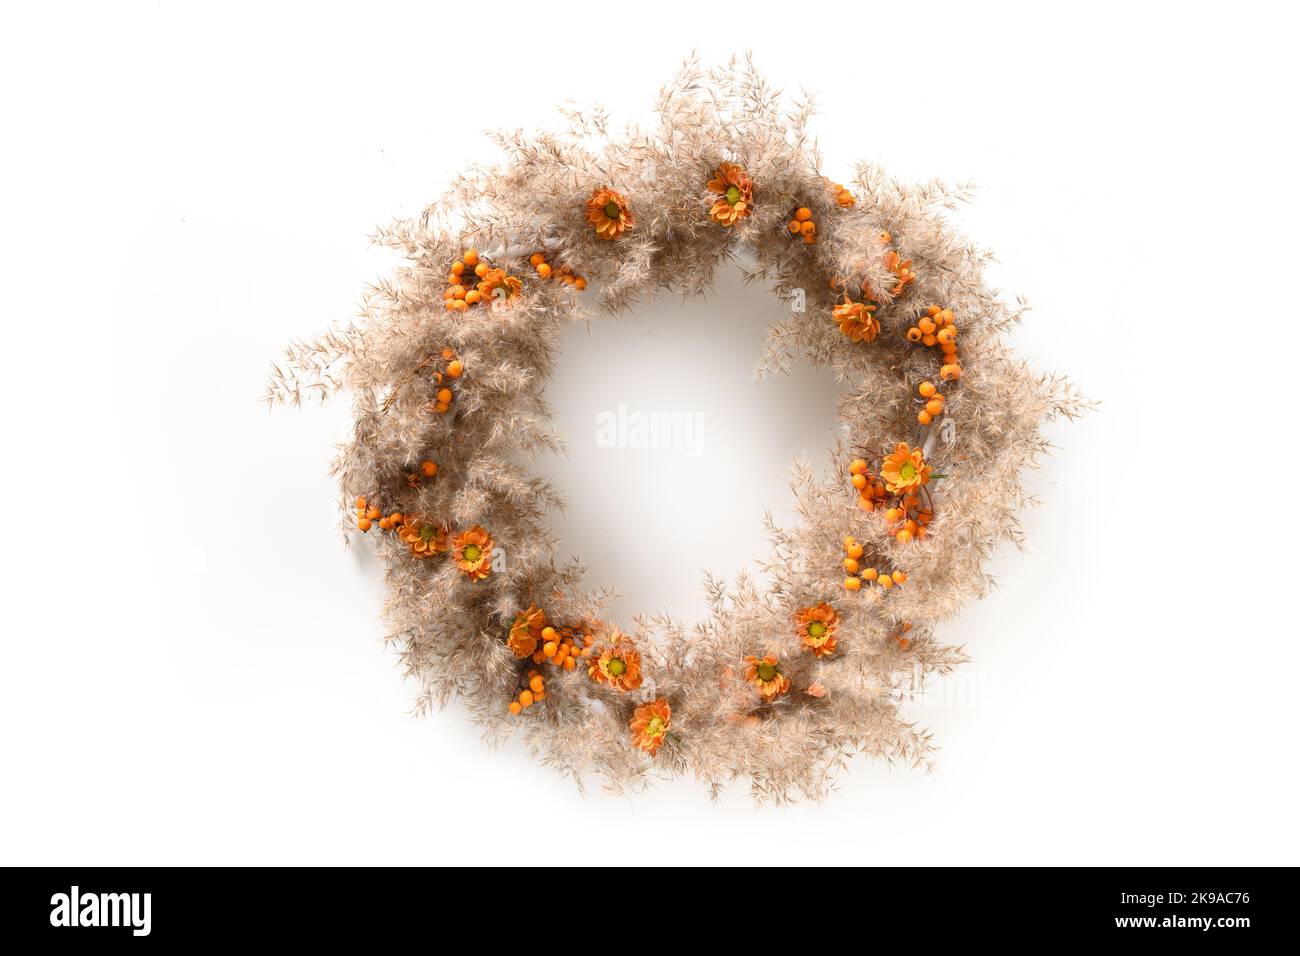 Thanksgiving wreath with orange flowers and dry natural materials isolated over white background. Top view. Stock Photo